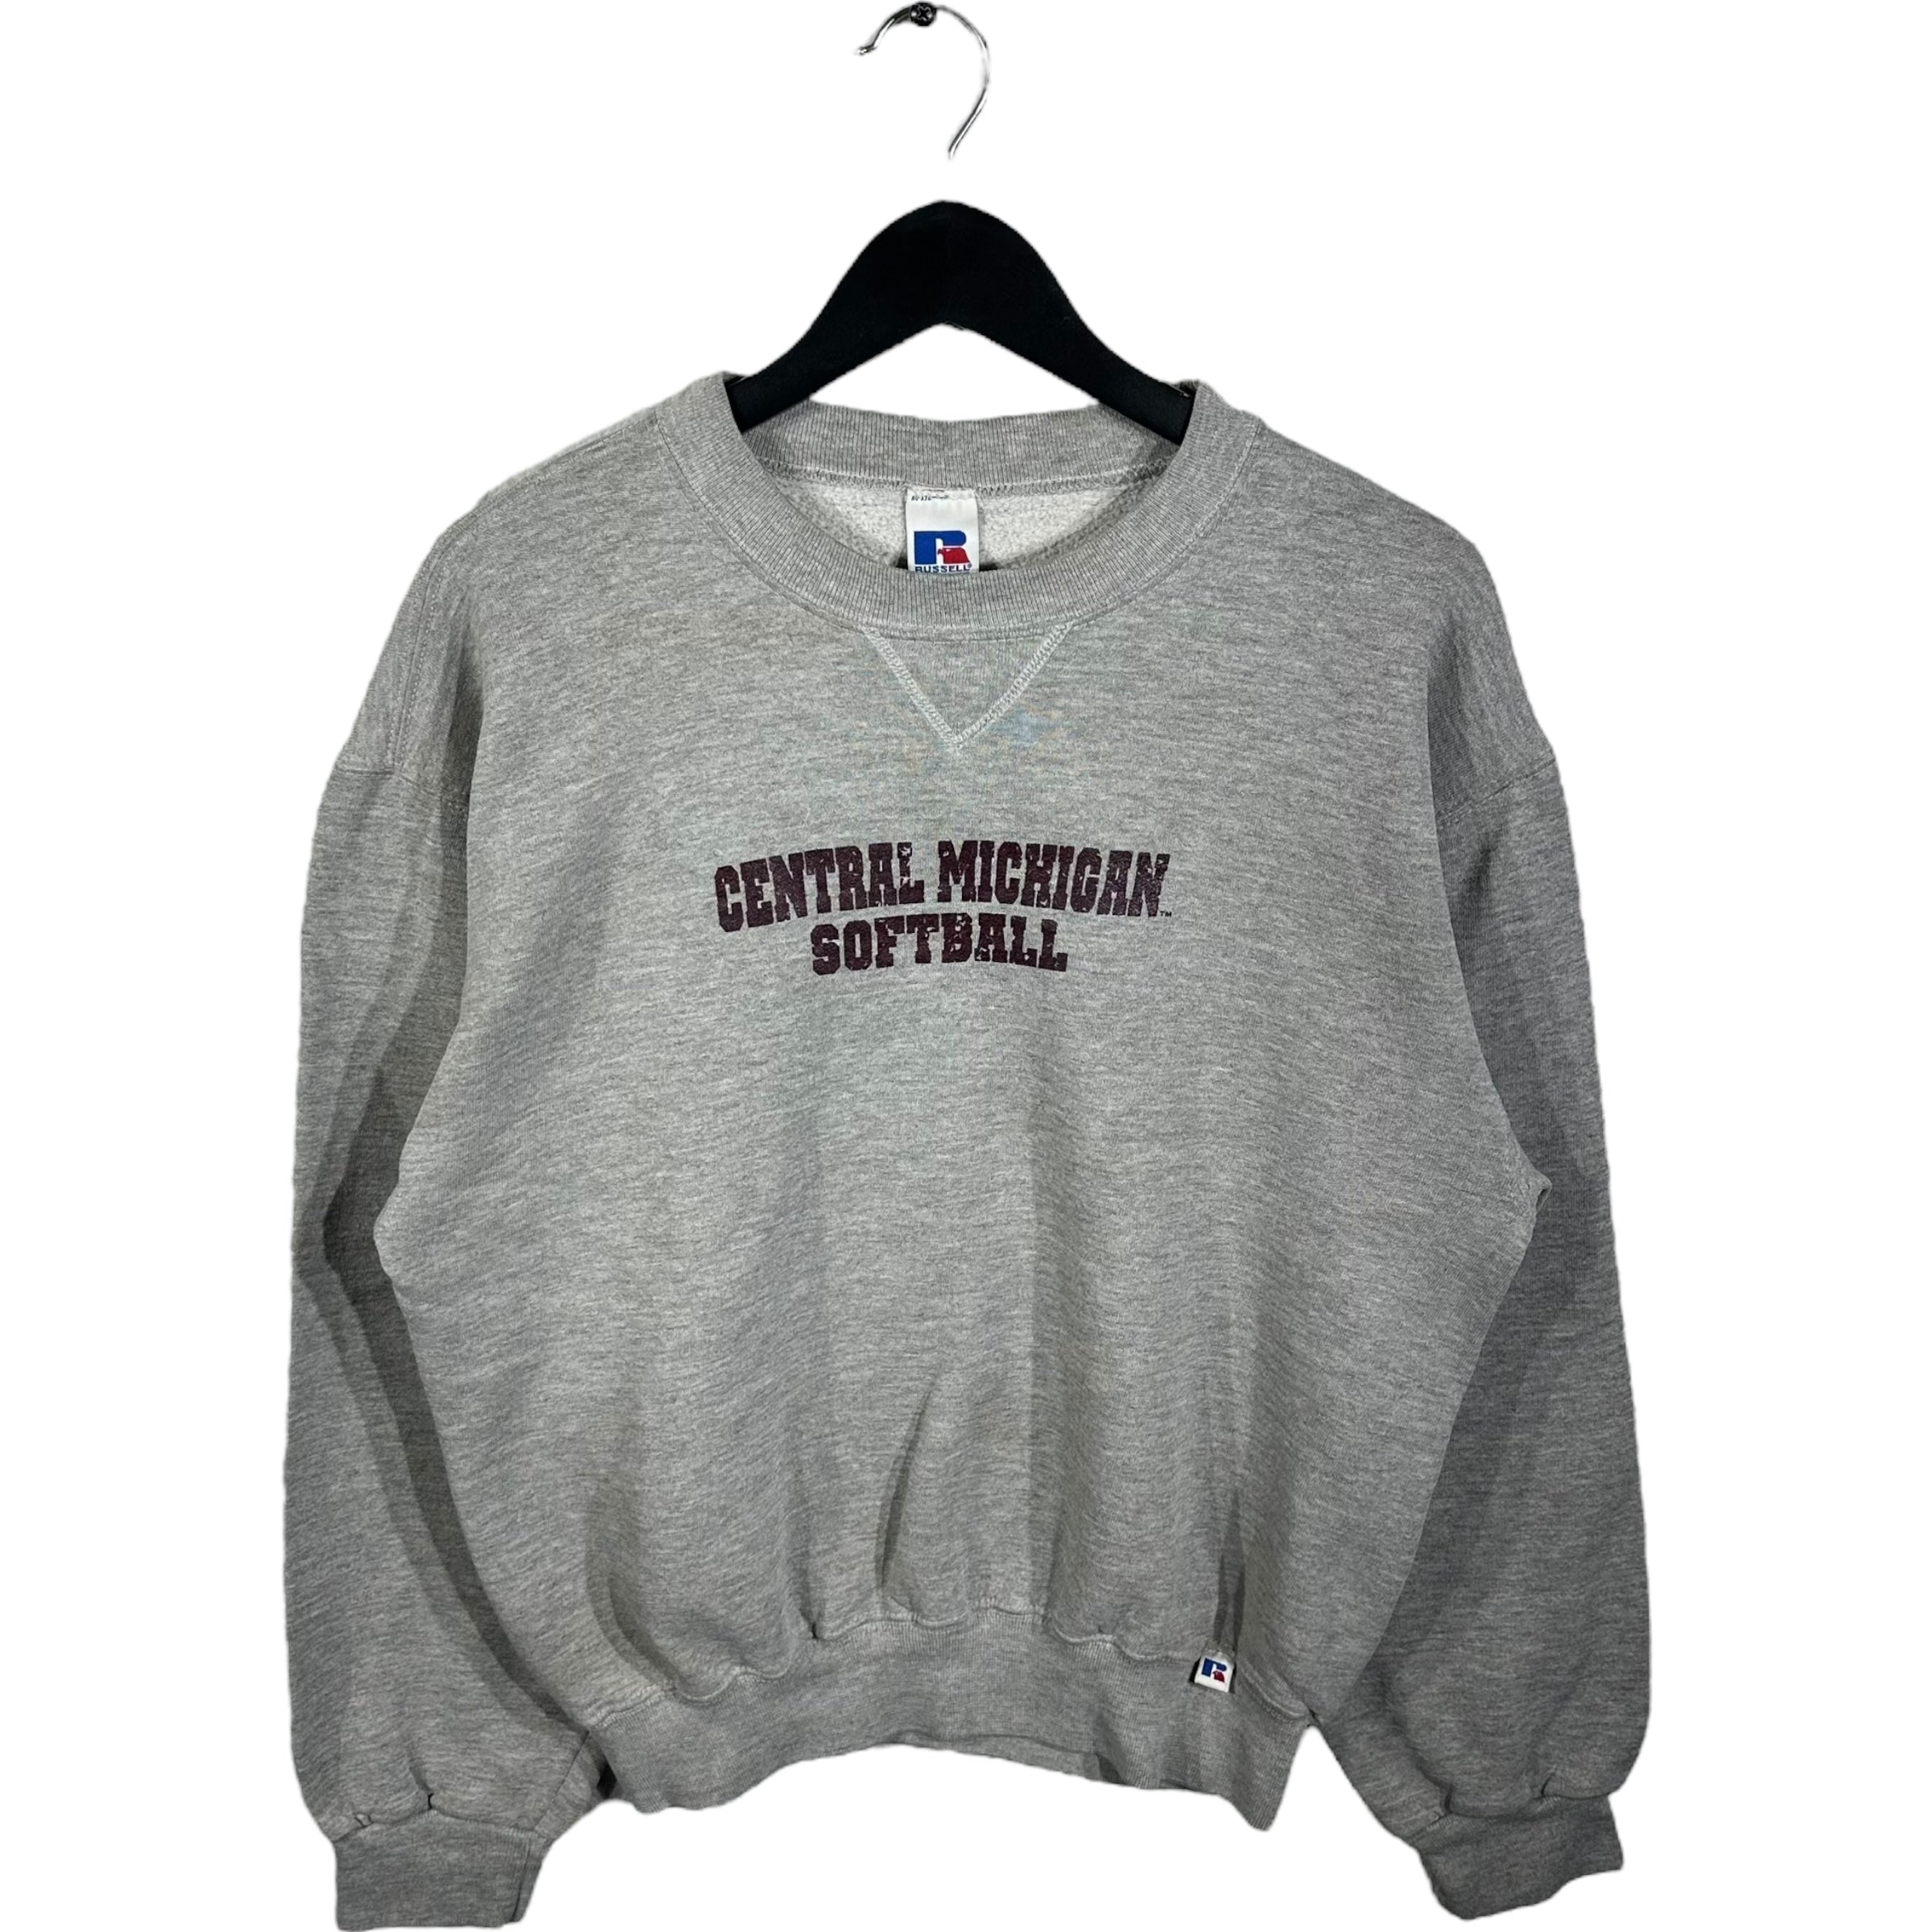 Vintage Russell Athletic Central Michigan SoftBall Crewneck